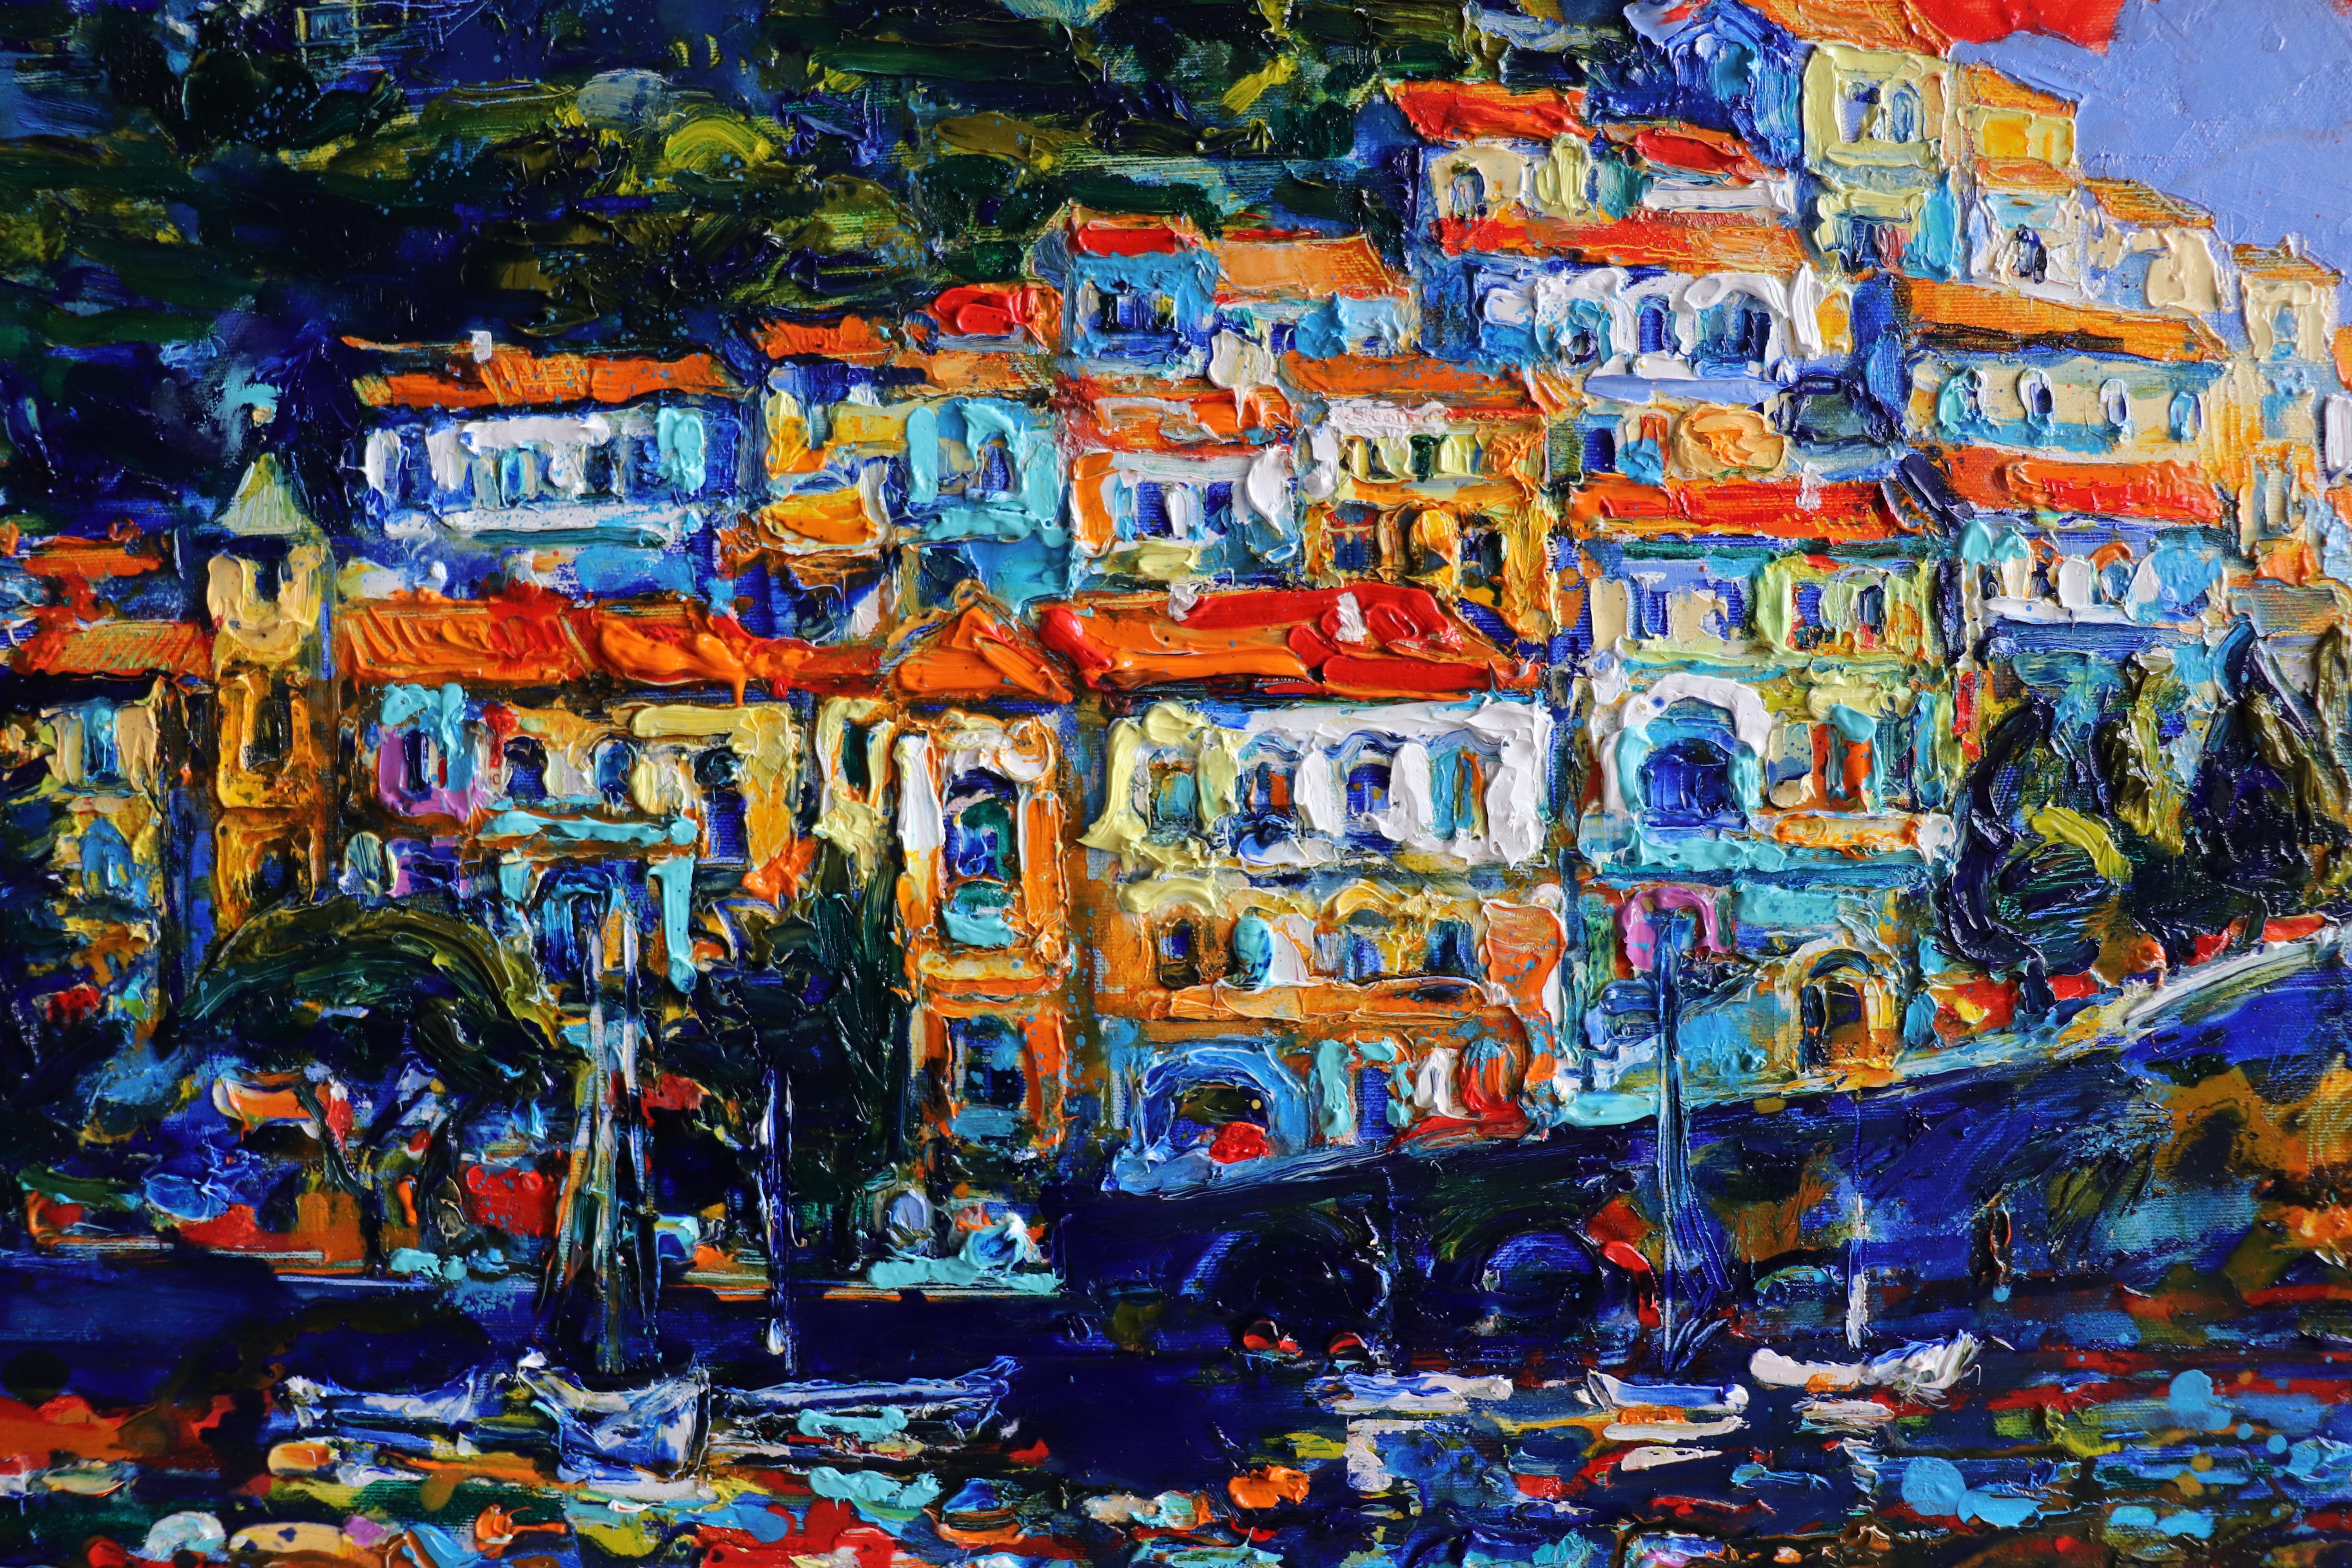 "Amalfi - Italy" is a painting by Maestro impressionist Maria Raycheva.

The painting is unframed.

About the artwork:

TECHNIQUE:  oil painting
STYLE: Impressionist, Contemporary
Edition : Unique, signed
Weight: Approximately 3 kg.

Frame: